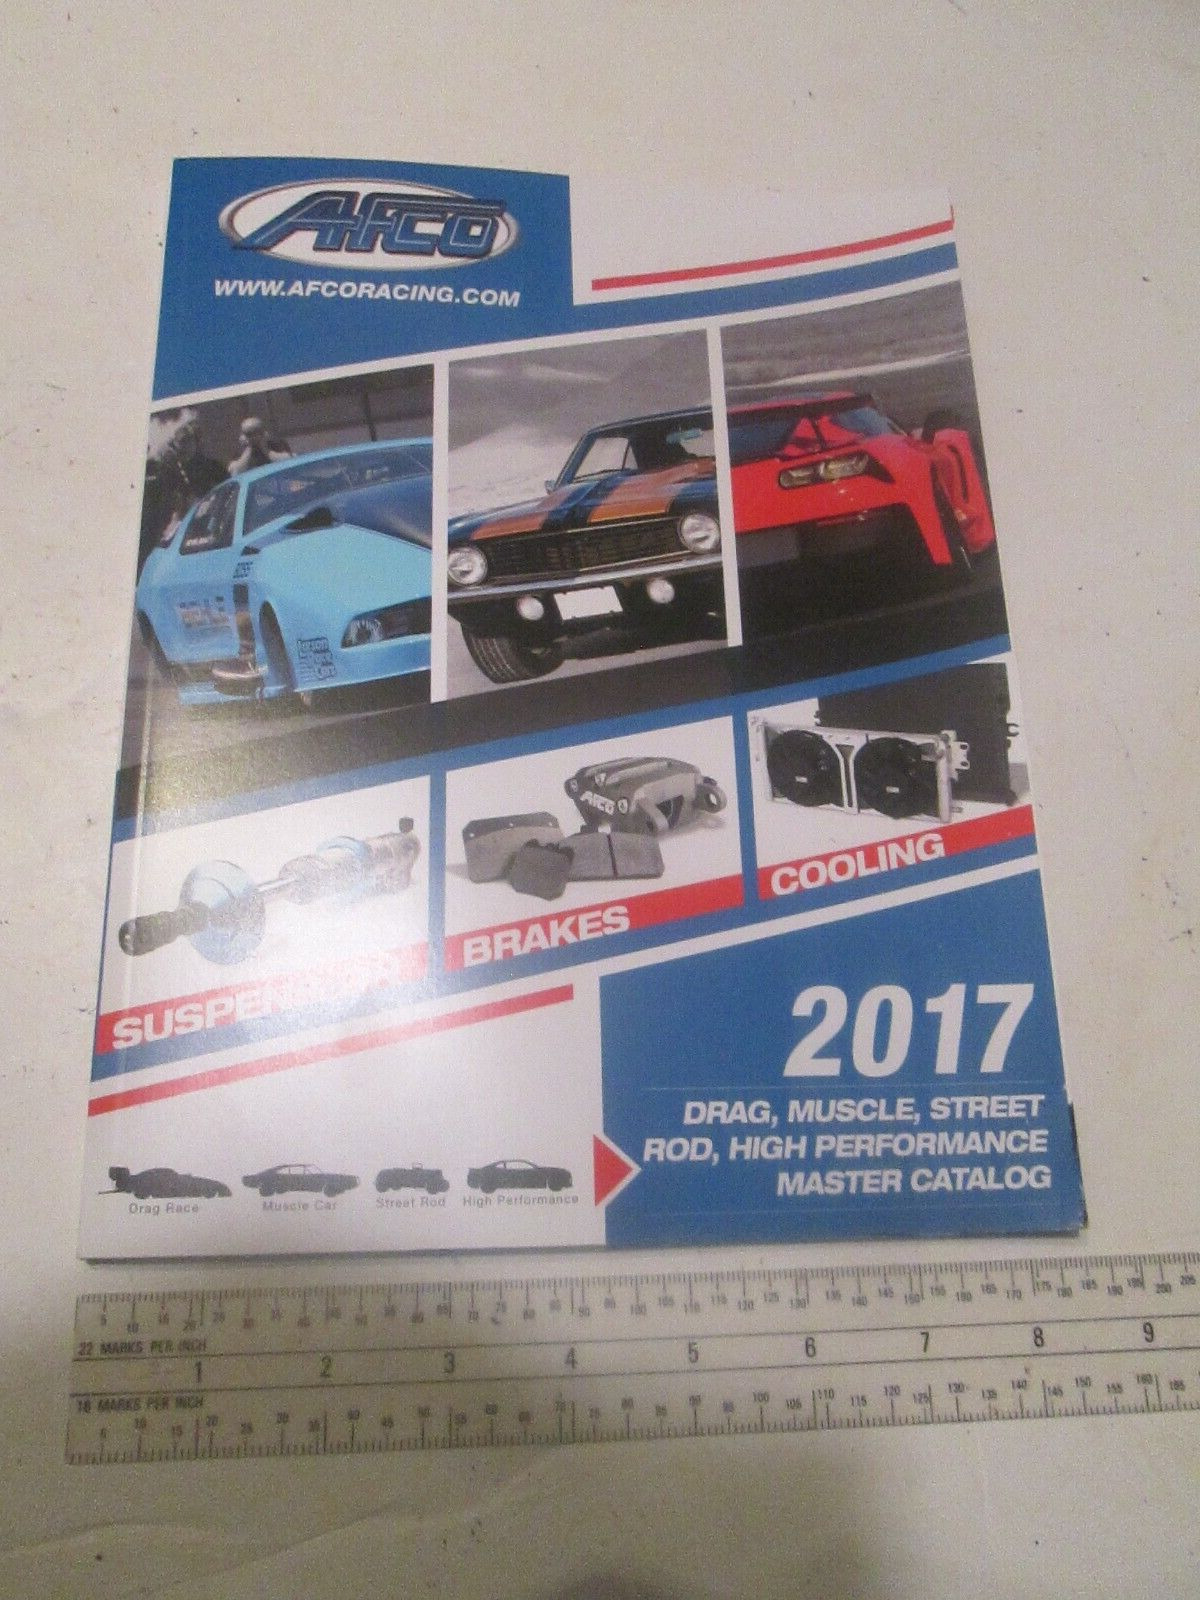 Racing Parts AFCO Racing Catalog for Drag, Muscle, Street Rod & High Performance